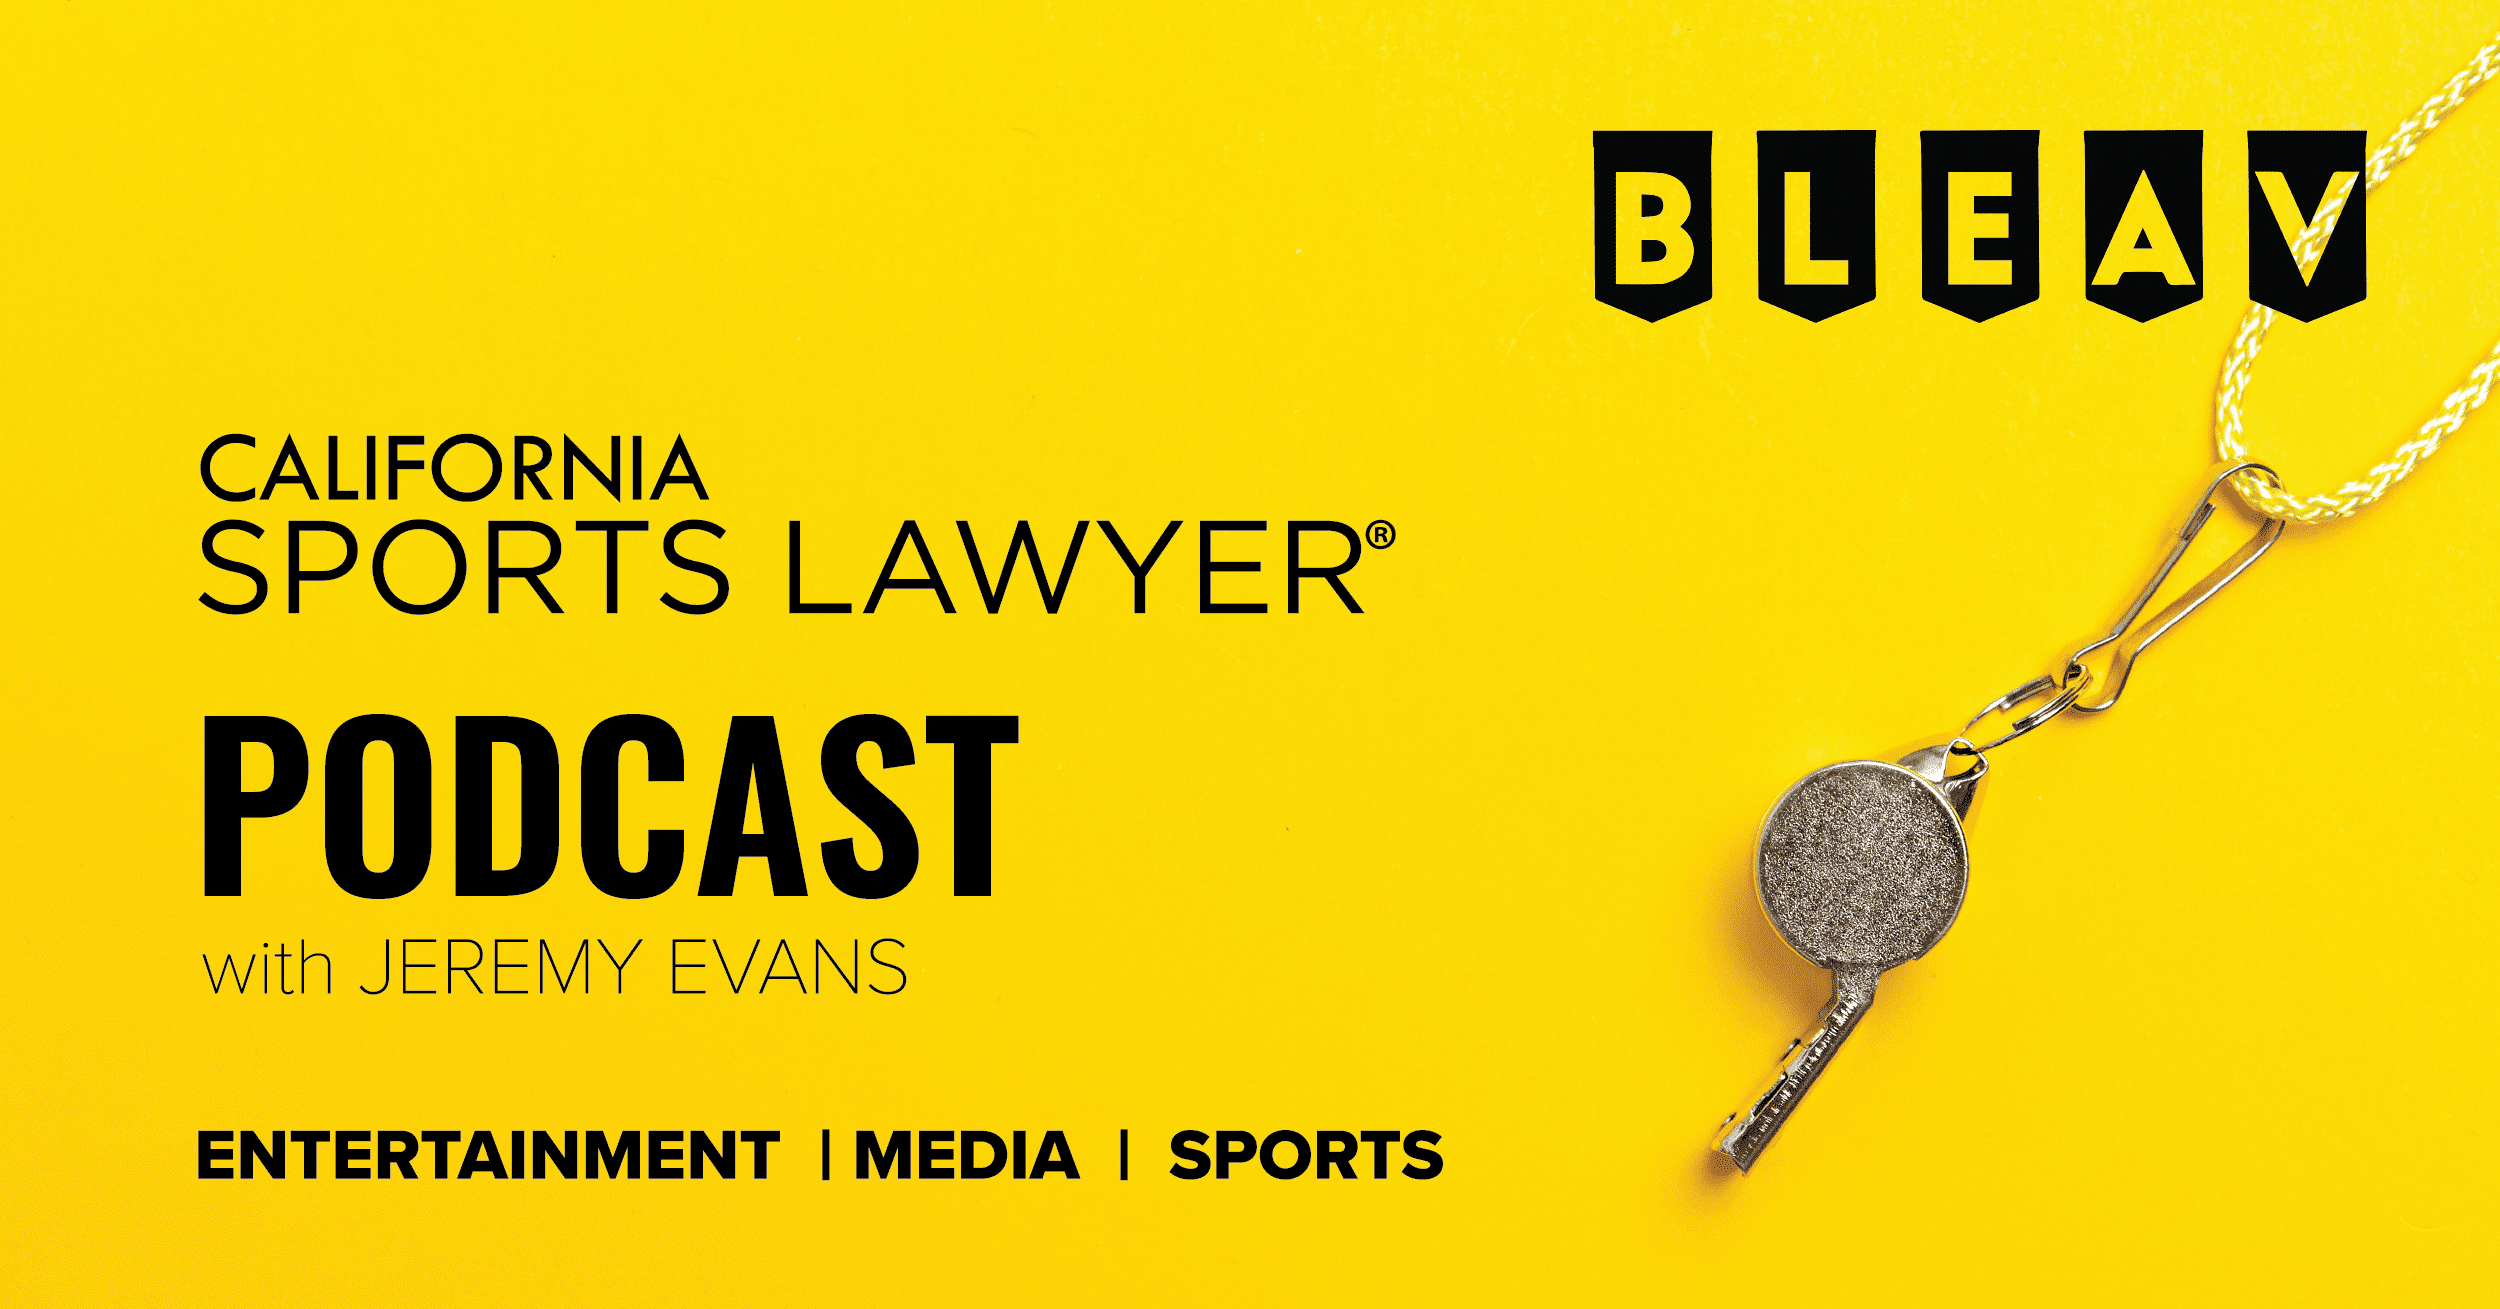 California Sports Lawyer® Podcast with Jeremy Evans: 5 Things that have and will Change College Sports